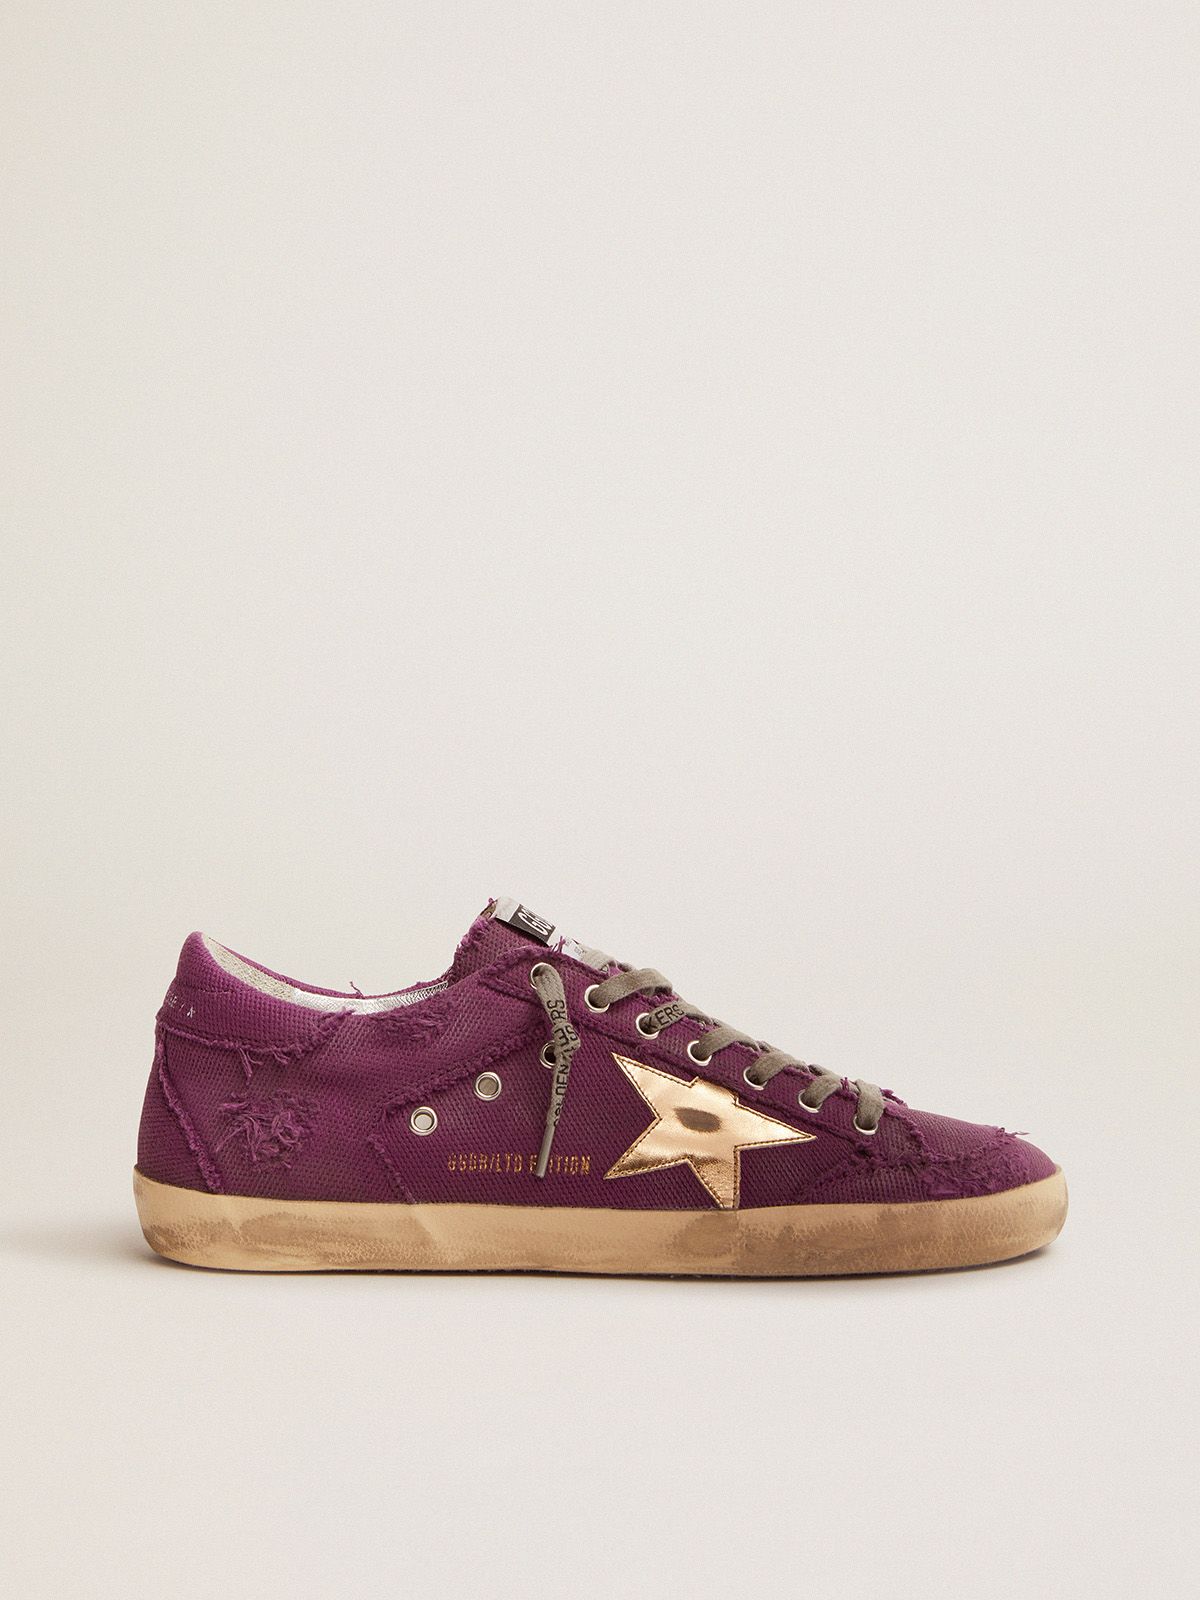 golden goose star LAB Penstar with sneakers Super-Star gold in purple leather canvas laminated distressed